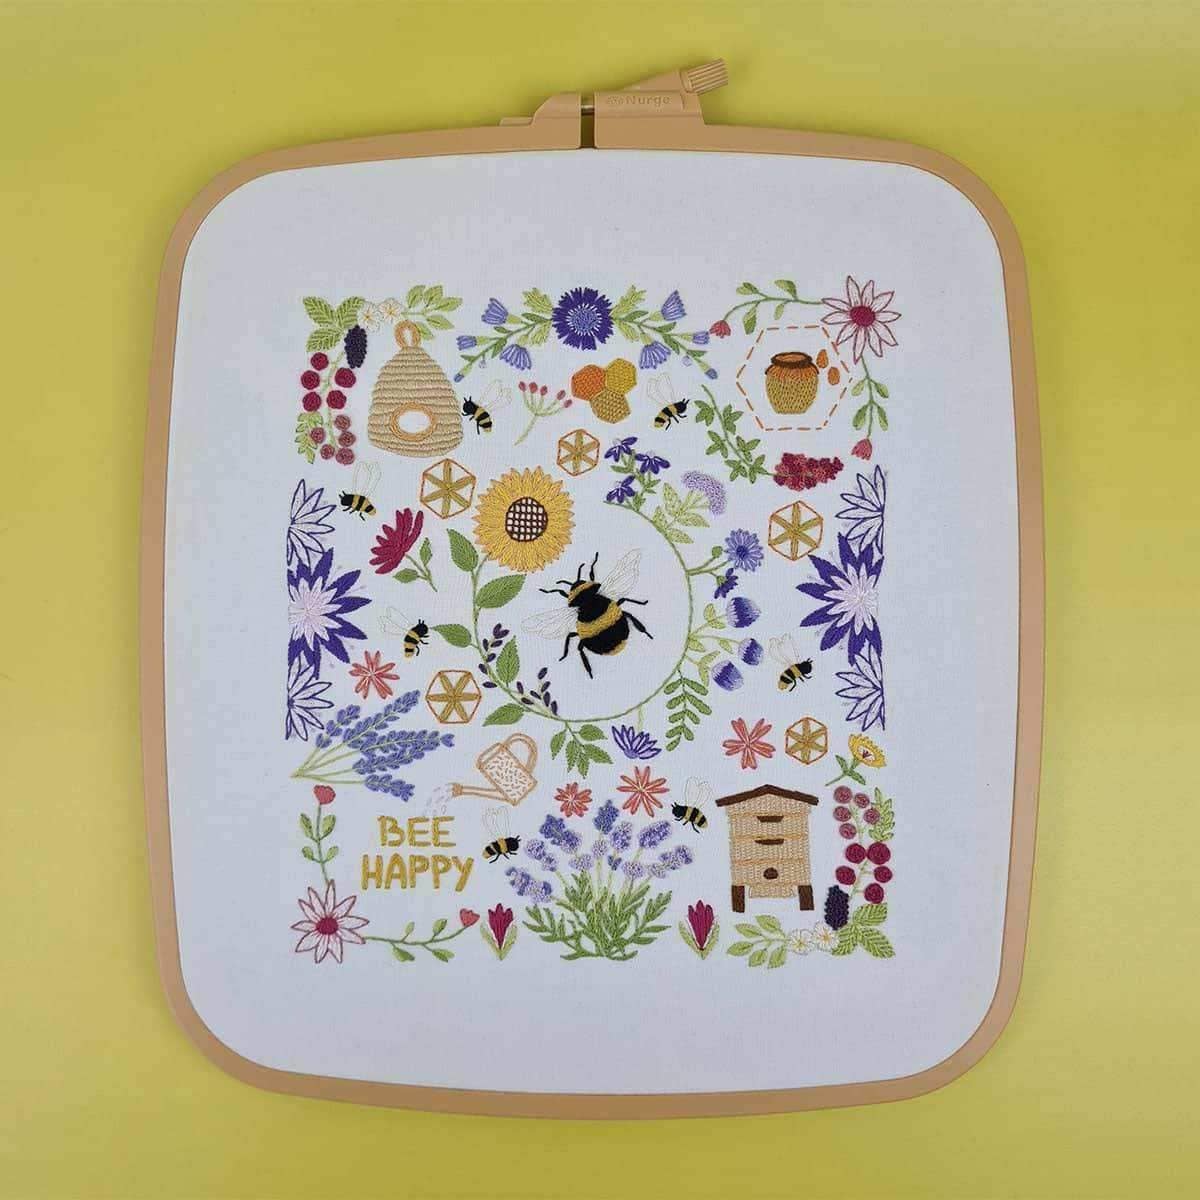 Bees and Blossoms Hand Embroidery Kit , Embroidery Kit , StitchDoodles , BEE EMBROIDERY, Bees and Blossoms, bird embroidery, Embroidery, embroidery hoop, embroidery hoop kit, Embroidery Kit, embroidery kit for adults, embroidery kit fro beginners, embroidery pattern, hand embroidery, hand embroidery fabric, hand embroidery kit, hand embroidery seat frame, hand embroidery thread, modern embroidery kits, nurge embroidery hoop, Printed Pattern, wildlife embroidery , StitchDoodles , shop.stitchdoodles.com